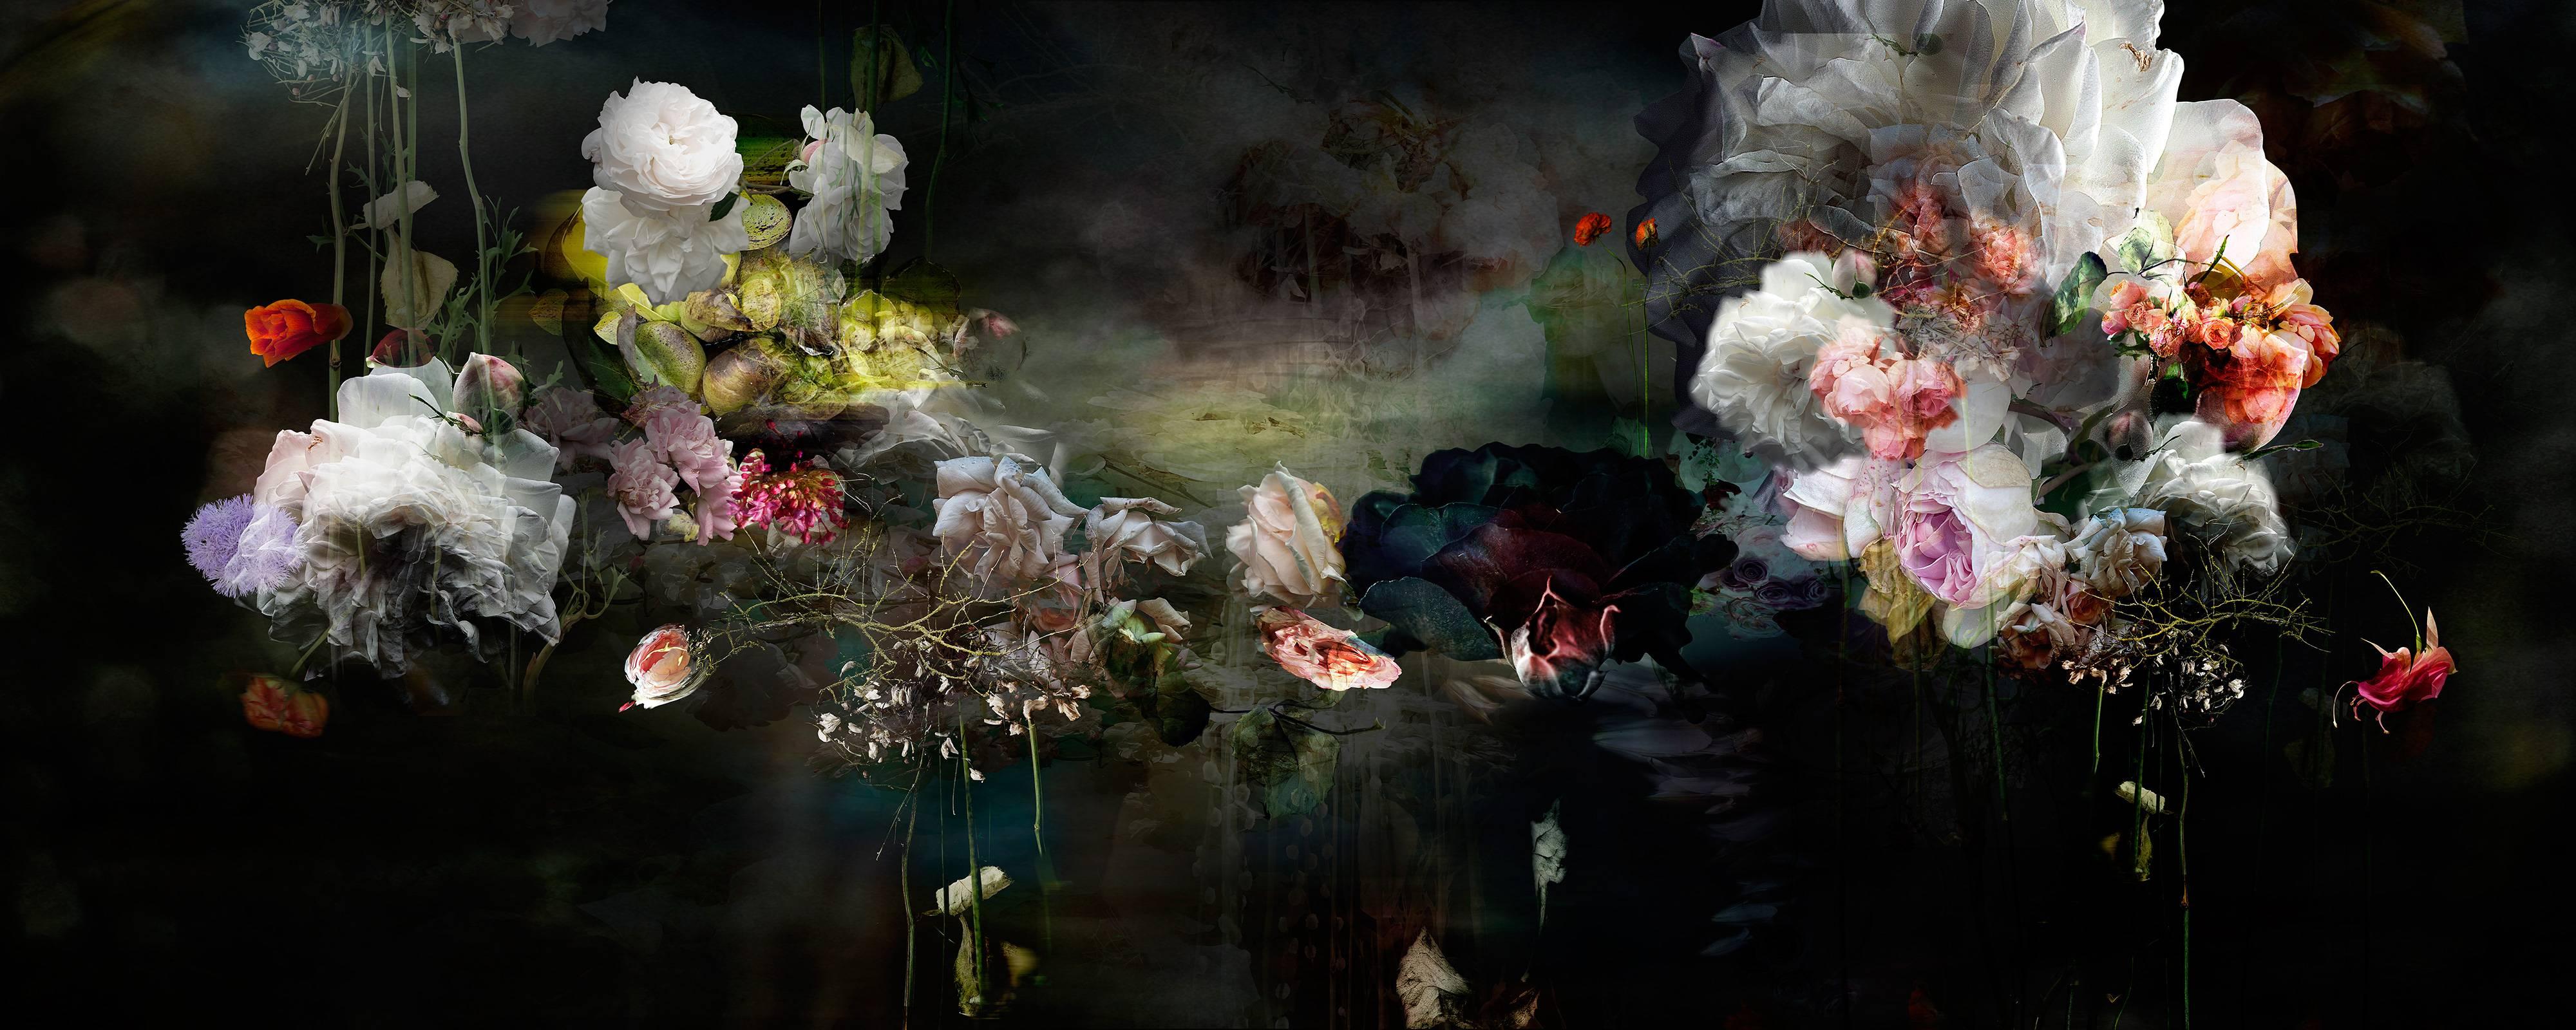 Isabelle Menin Still-Life Photograph - Song for dead heroes #1 Floral abstract landscape dark color photo composition